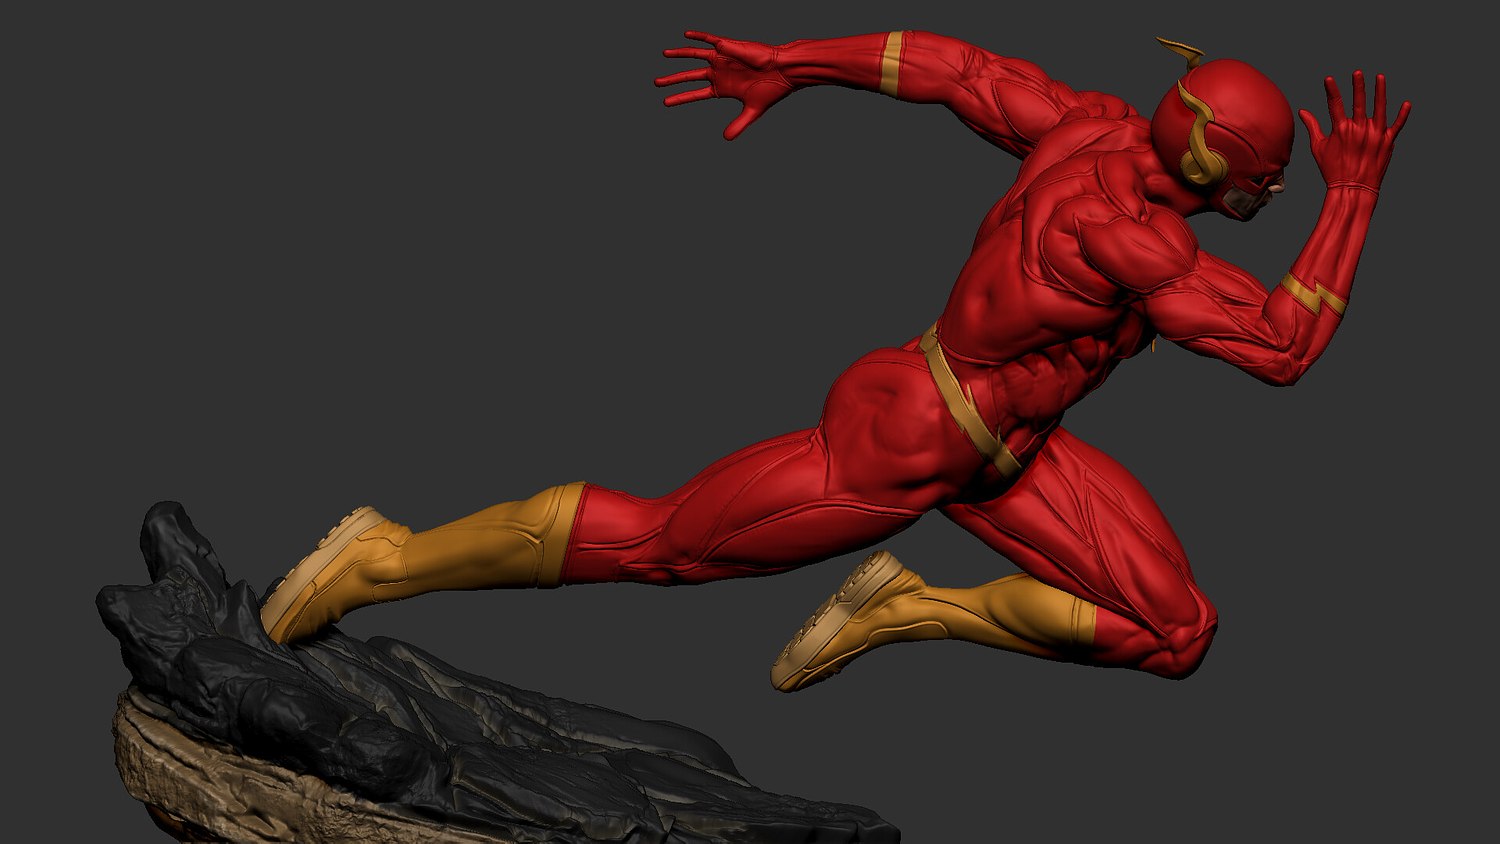 Flash Running From DC